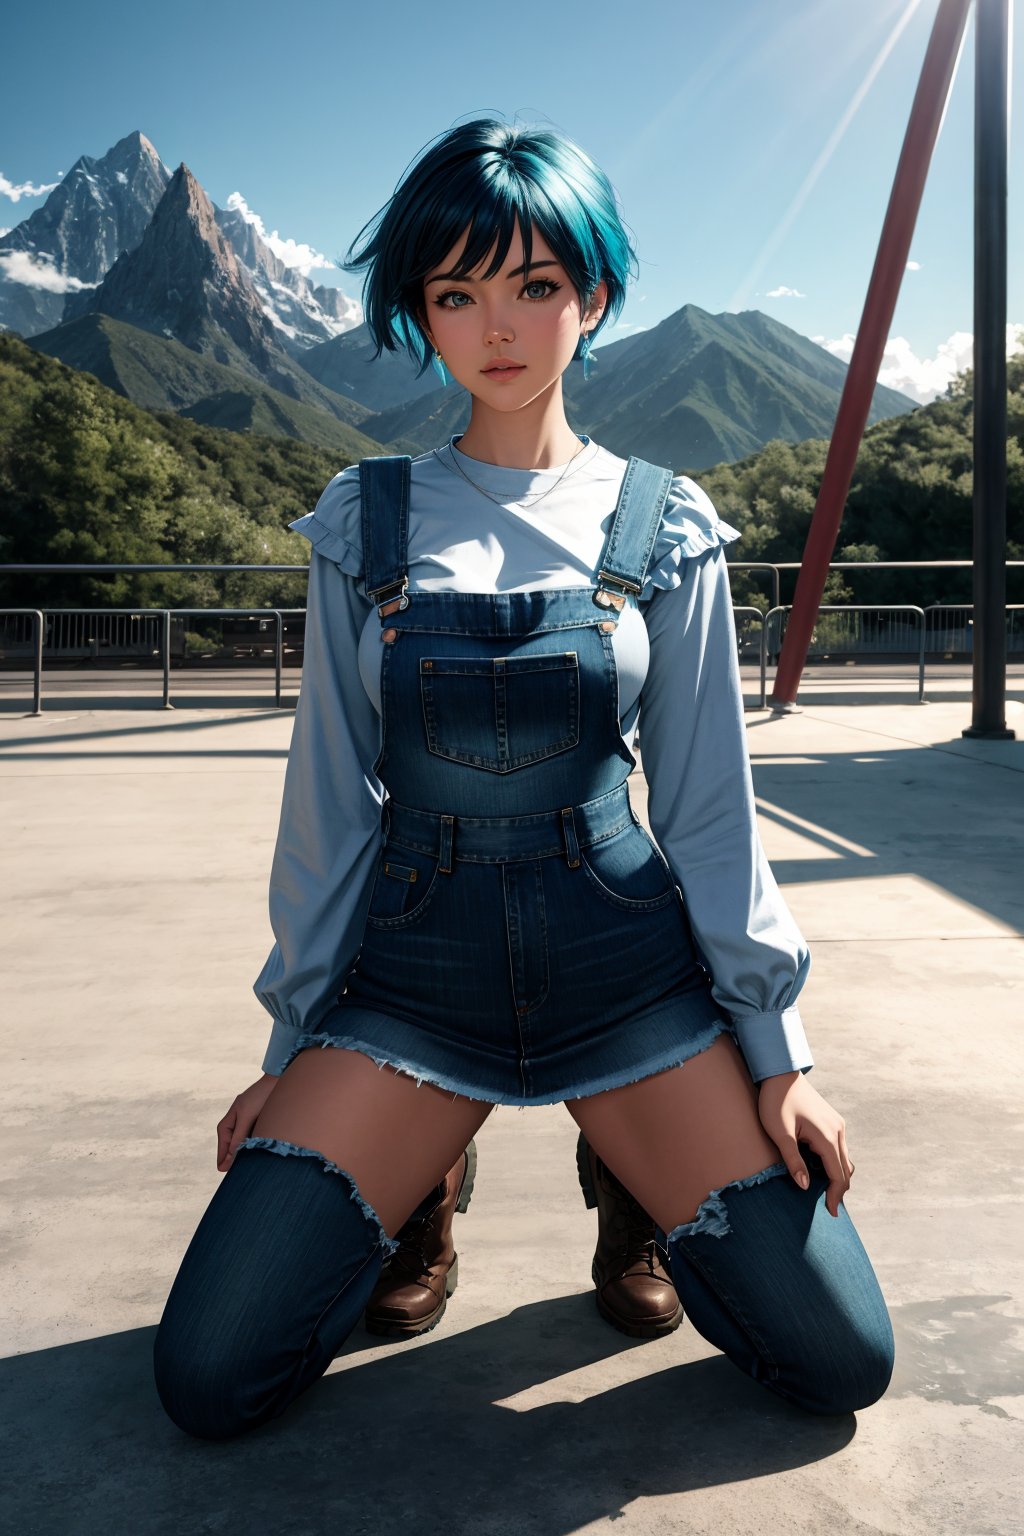 masterpiece of photorealism, photorealistic highly detailed professional 8k raw photography, best hyperrealistic quality, volumetric real-time lighting and shadows, Objective Shot Photography, Mountain Climber, Apple or Inverted Triangle: Broader shoulders and bust, with a less defined waist and narrower hips,  **Denim Overall Dress with a Long-Sleeve Top and Ankle Boots**, Electric Blue and Teal Layered Pixie, Kneeling Pose: Kneeling with a strong and confident posture., Deserted Amusement Parks full of busy people